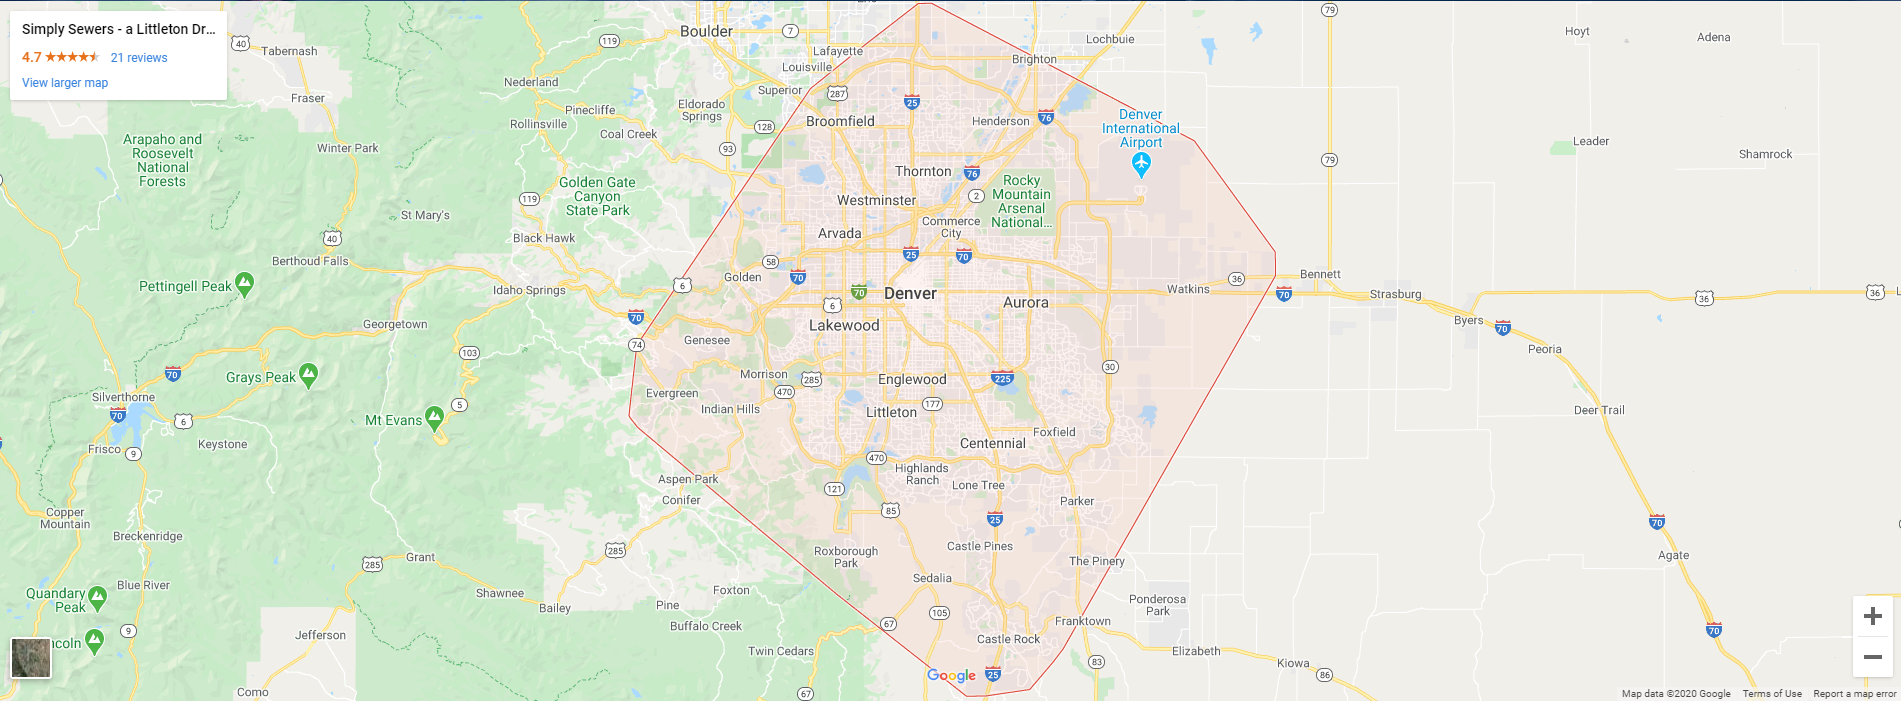 A map of Denver and surrounding cities and towns